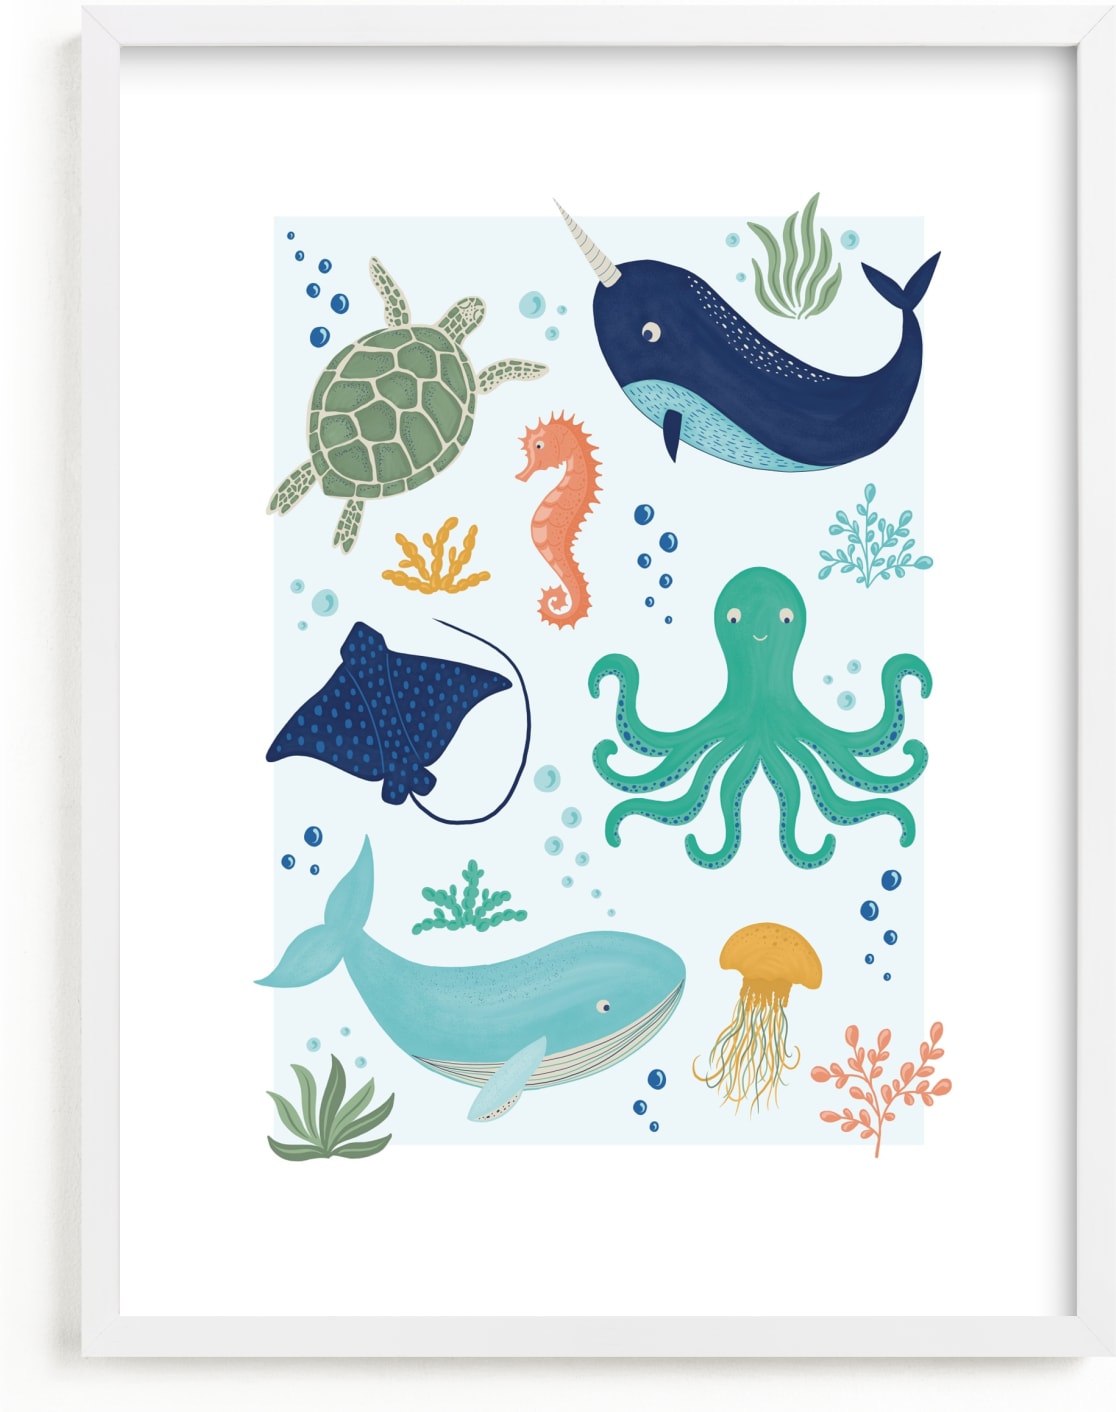 This is a blue art by Beth Schneider called Sea Friends.